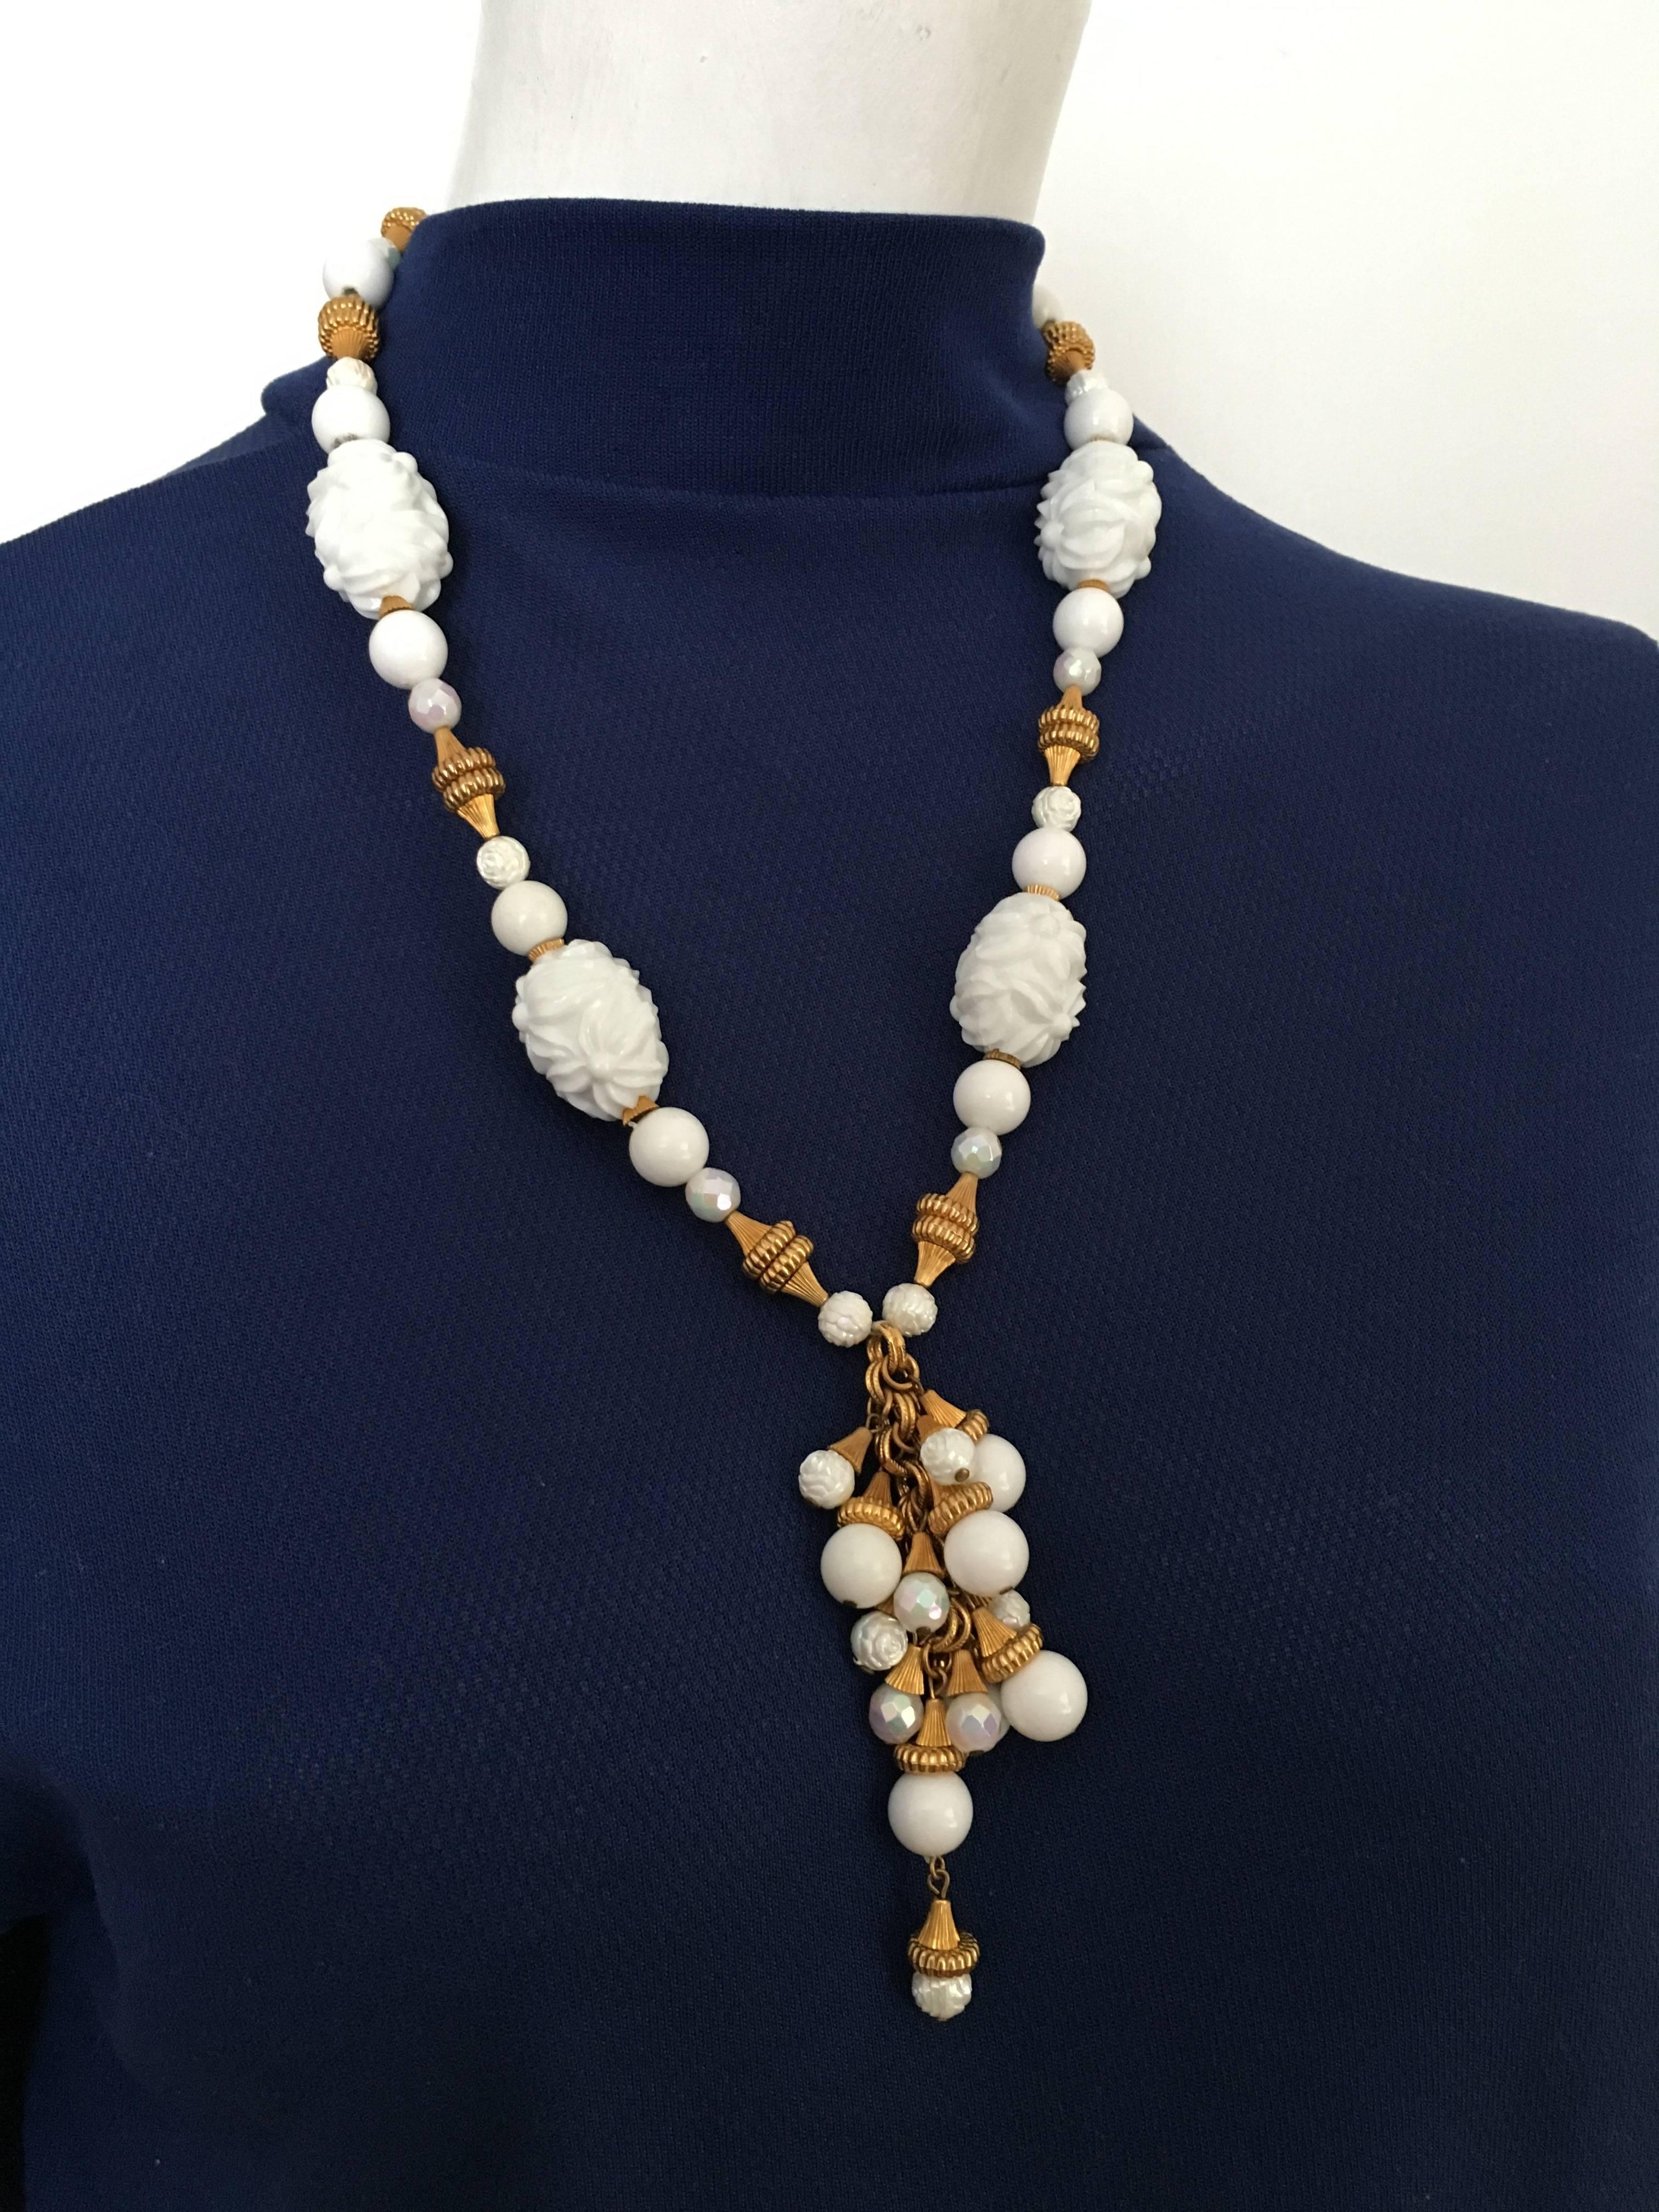 Hattie Carnegie 1950s necklace with tassel pendant white & gold beads.  The large white beads have flower patterns.  This 1950s necklace was never worn and still has the original tag with price on it.  The original value to this necklace was $10